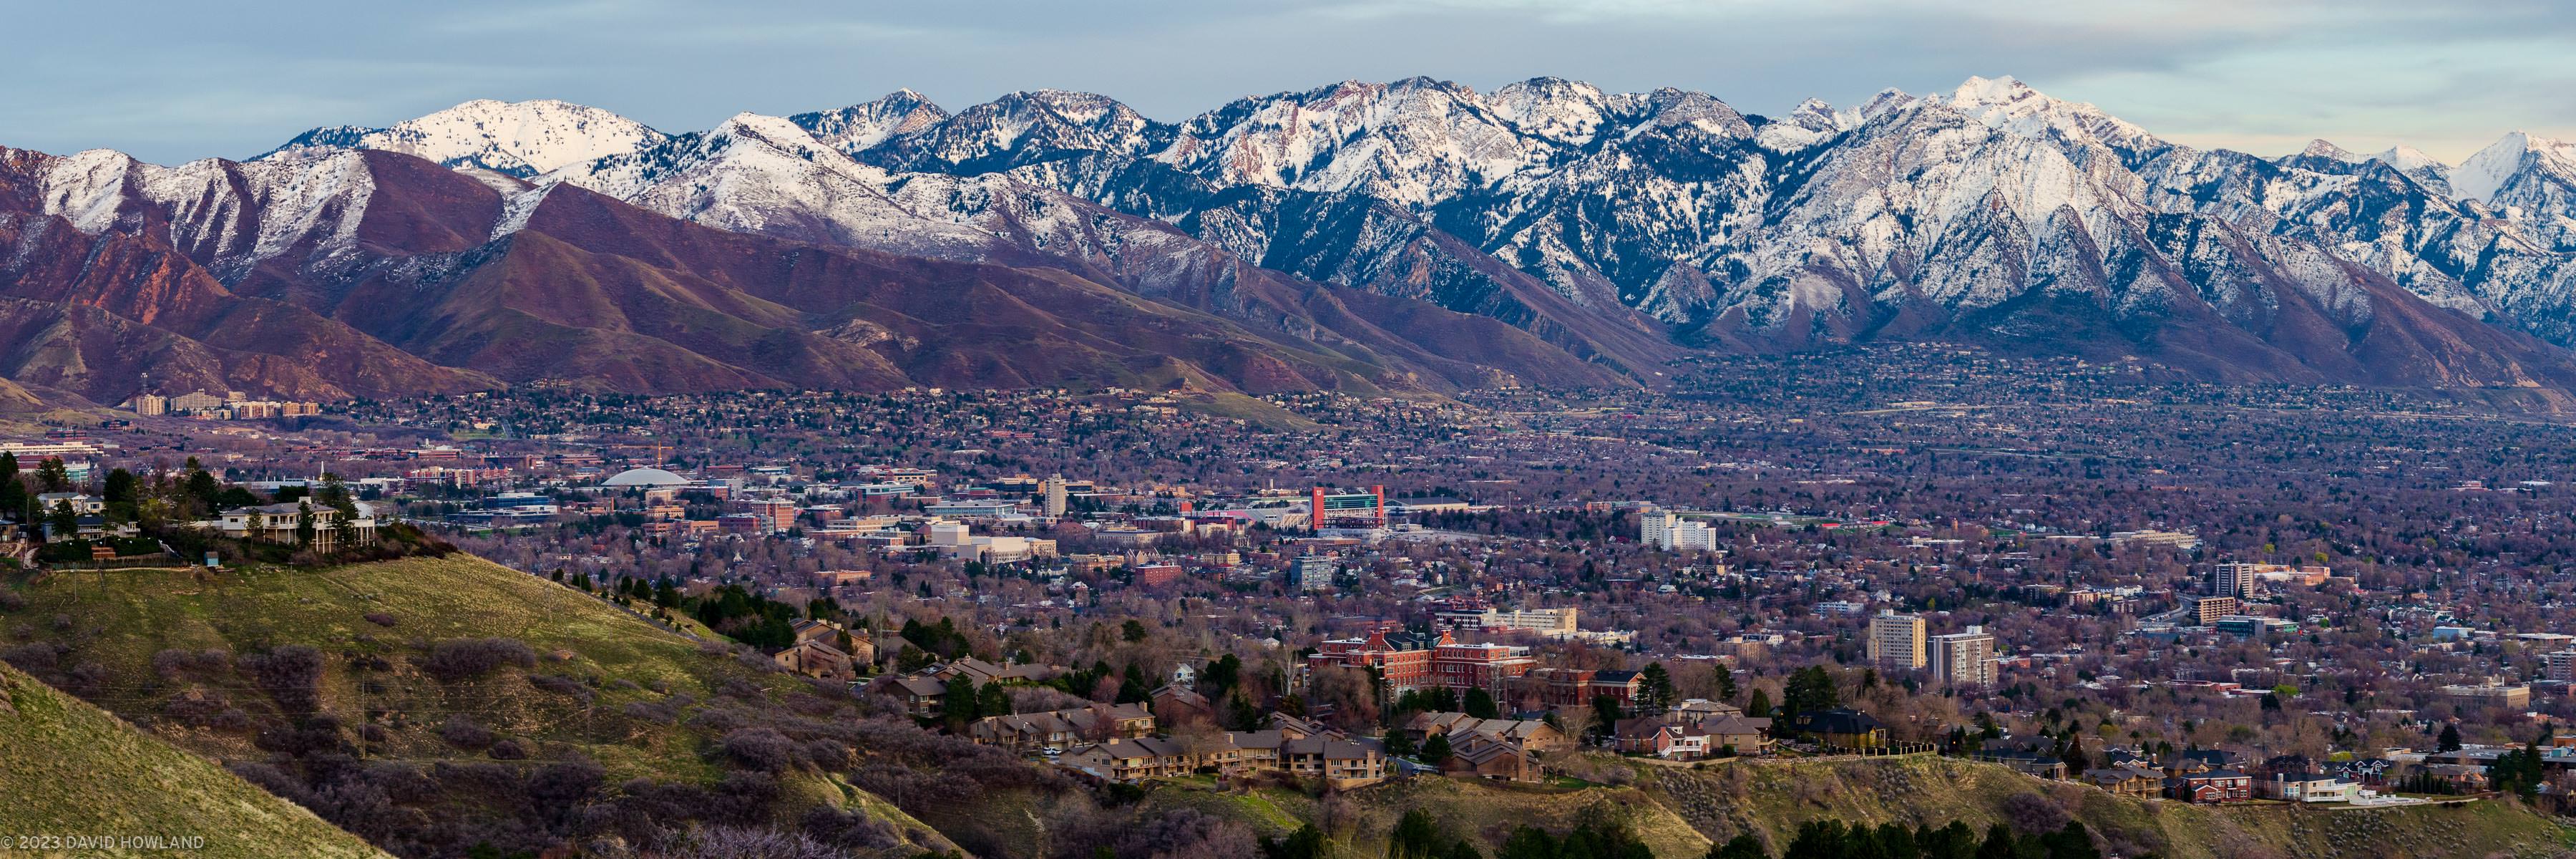 A panorama photo of the snow covered Wasatch mountain range rising over the buildings of the University of Utah and the Salt Lake Valley.